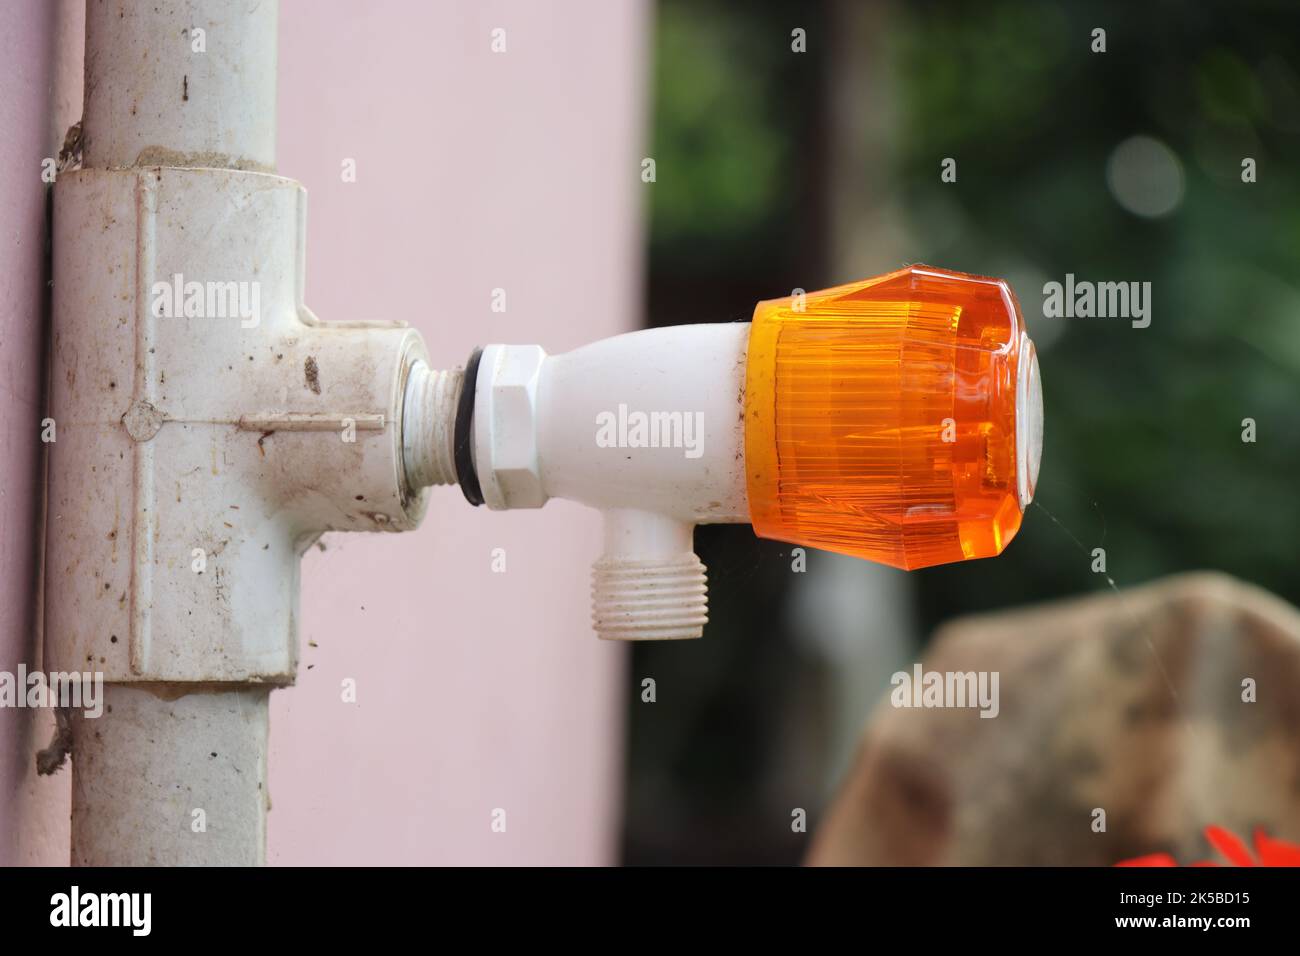 Faucet or plastic water tap with an orange rotating knob fixed on a PVC water pipe attached to a wall Stock Photo